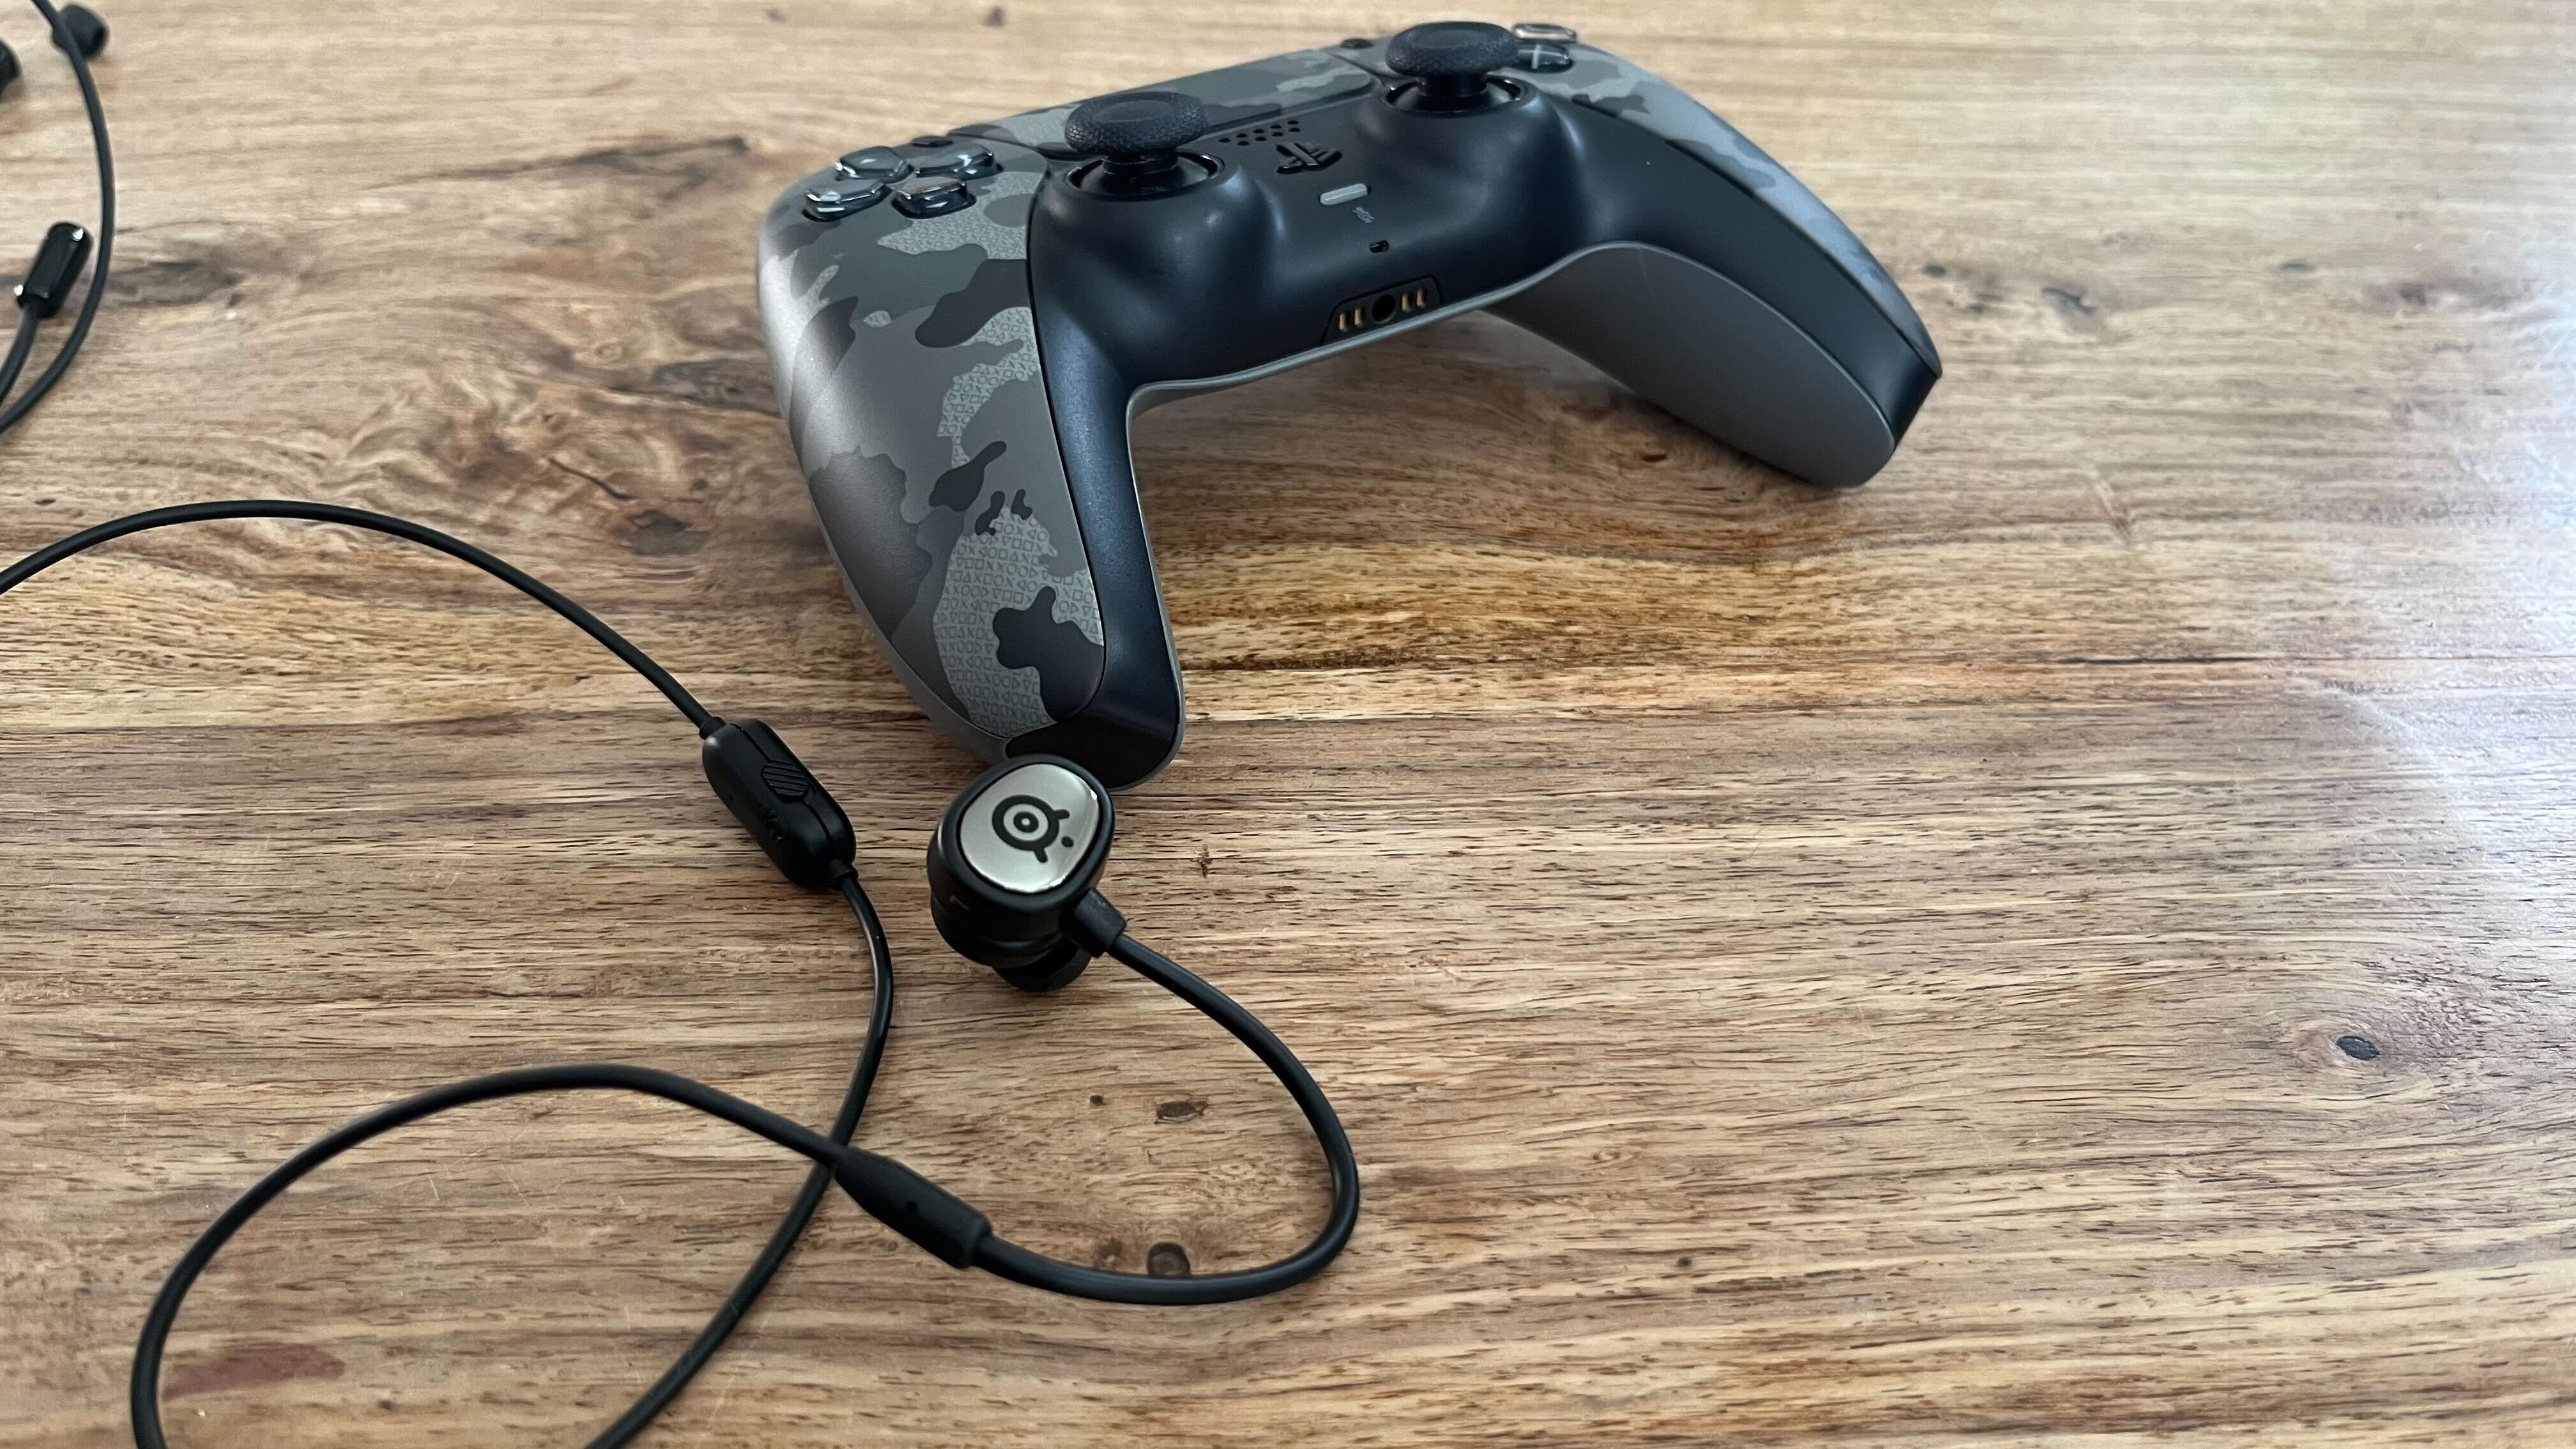 SteelSeries Tusq gaming earbuds and a PS5 controller.